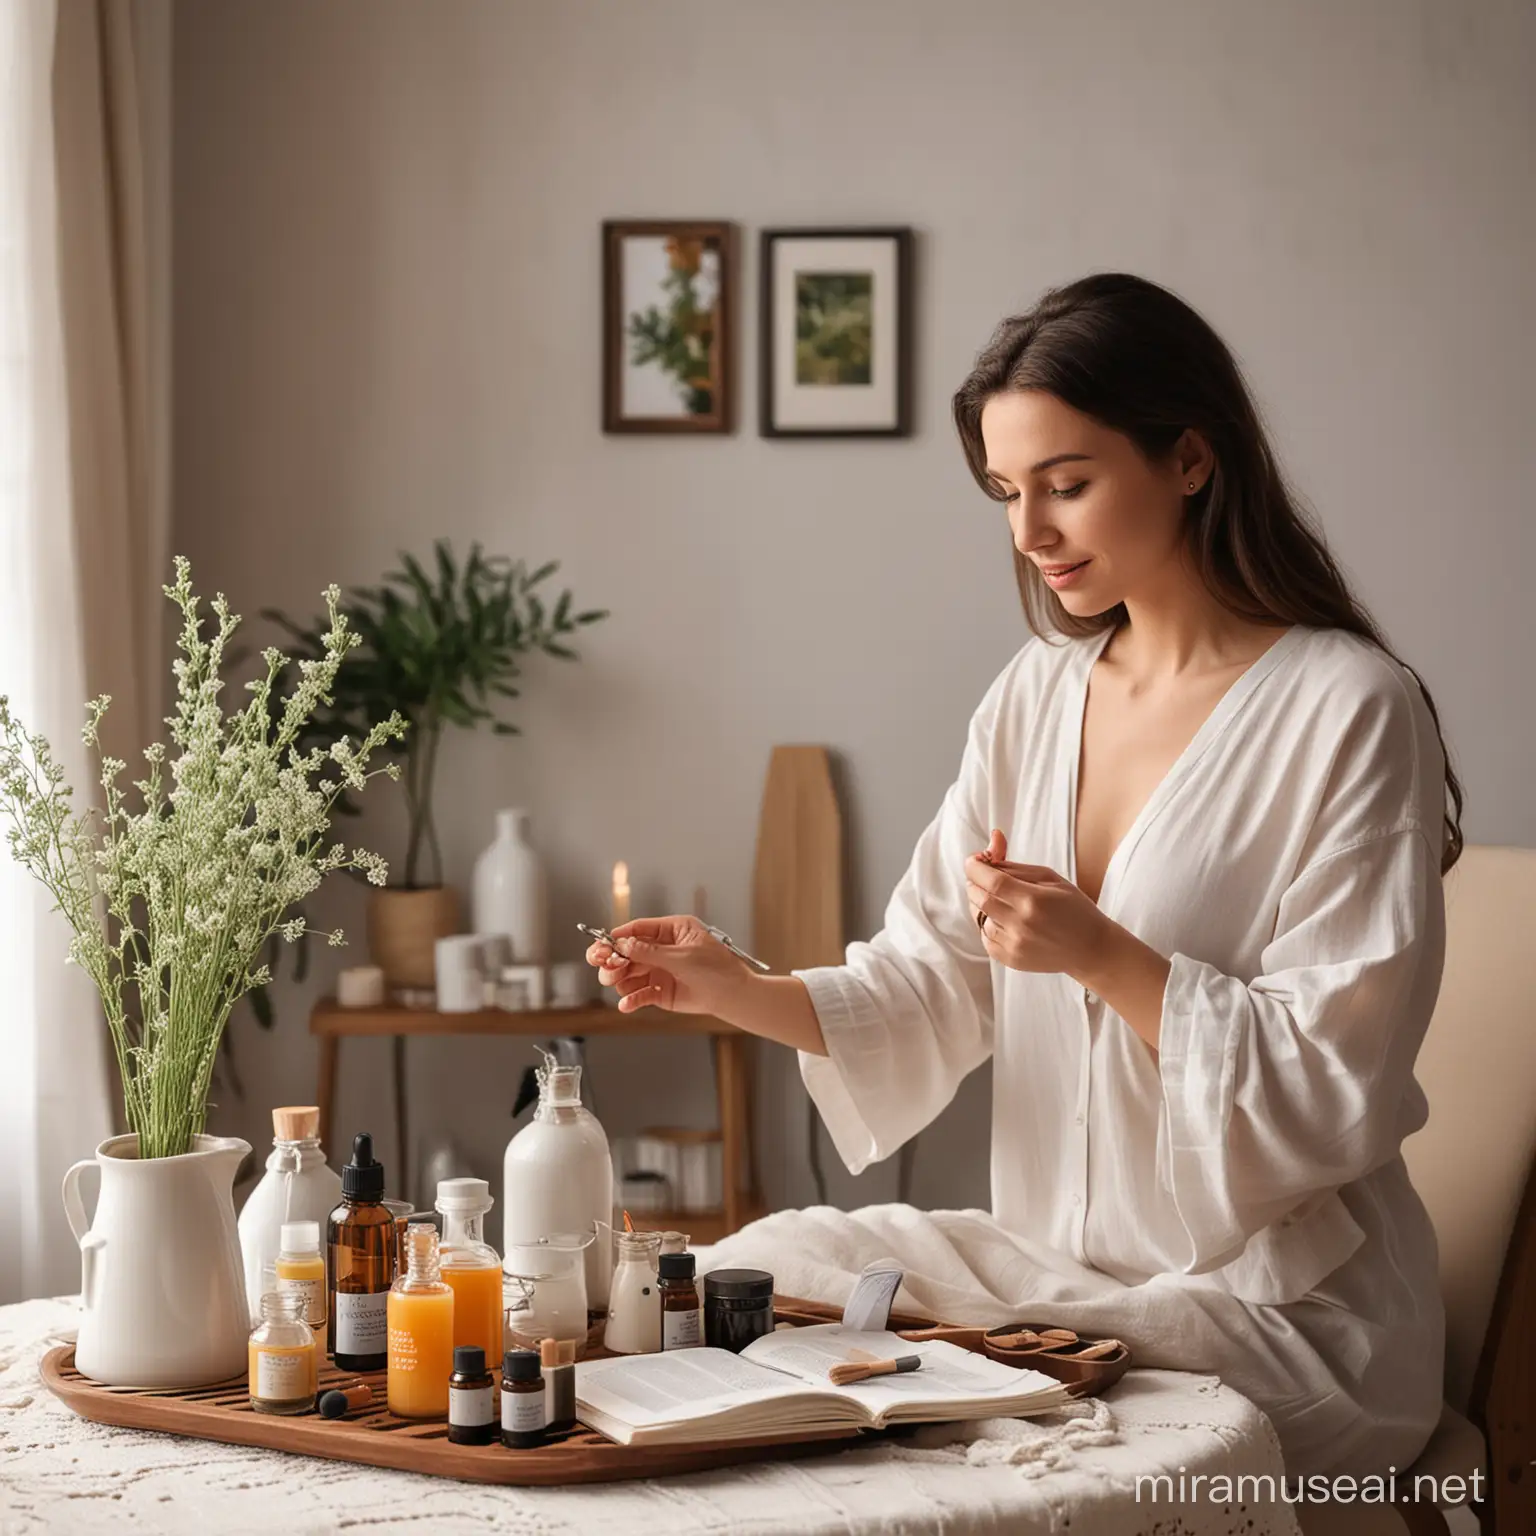 Woman at Home Creating NonFire Aromatherapy Art